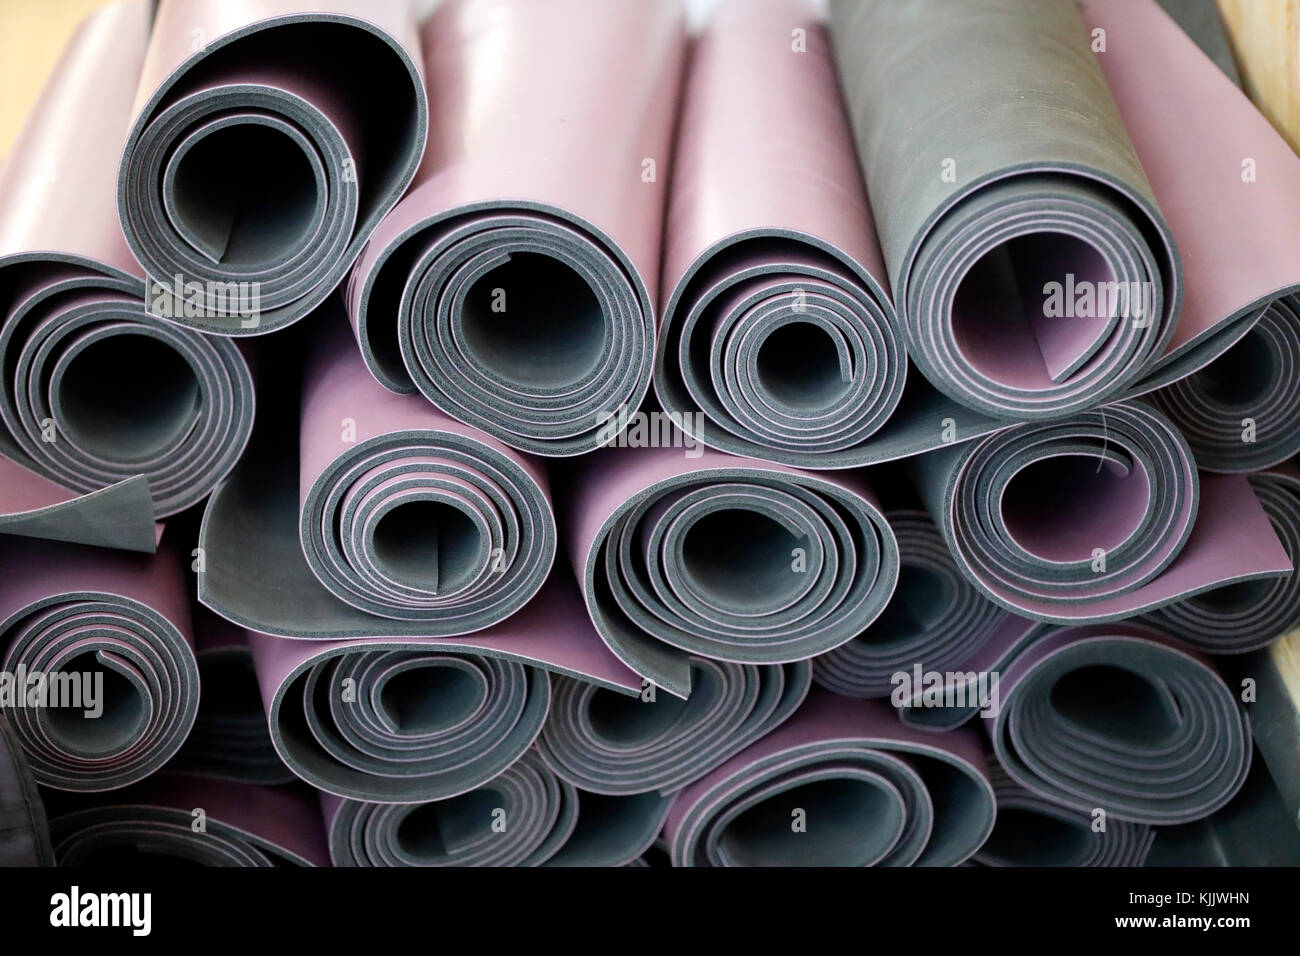 Rolled-up yoga mats.  France. Stock Photo